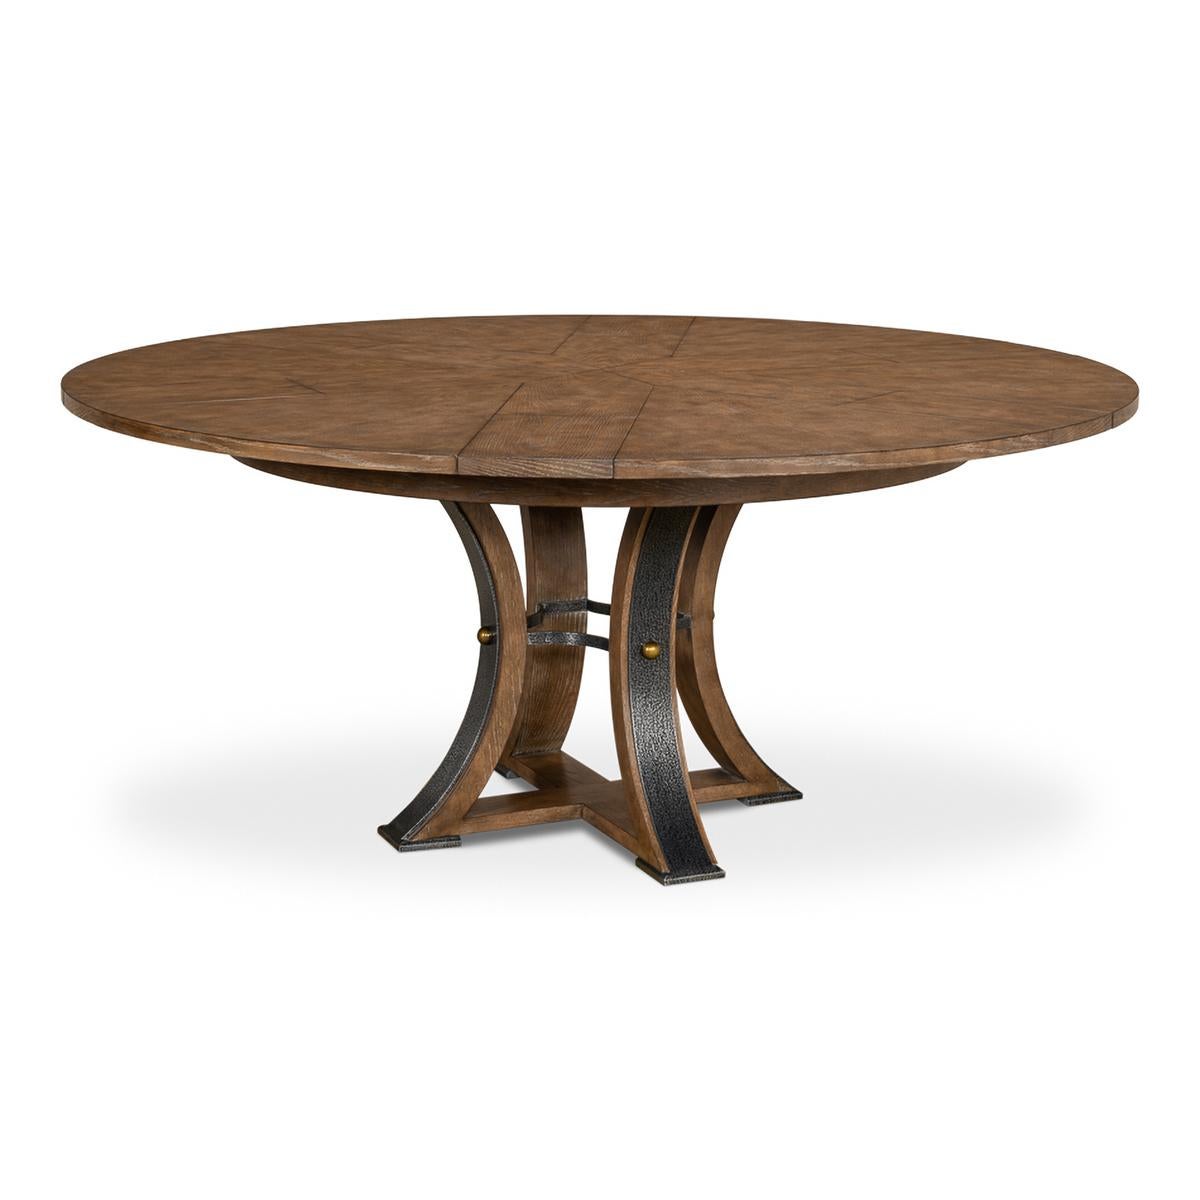 Vietnamese Modern Industrial Round Dining Table - 70 - Light Mink For Sale